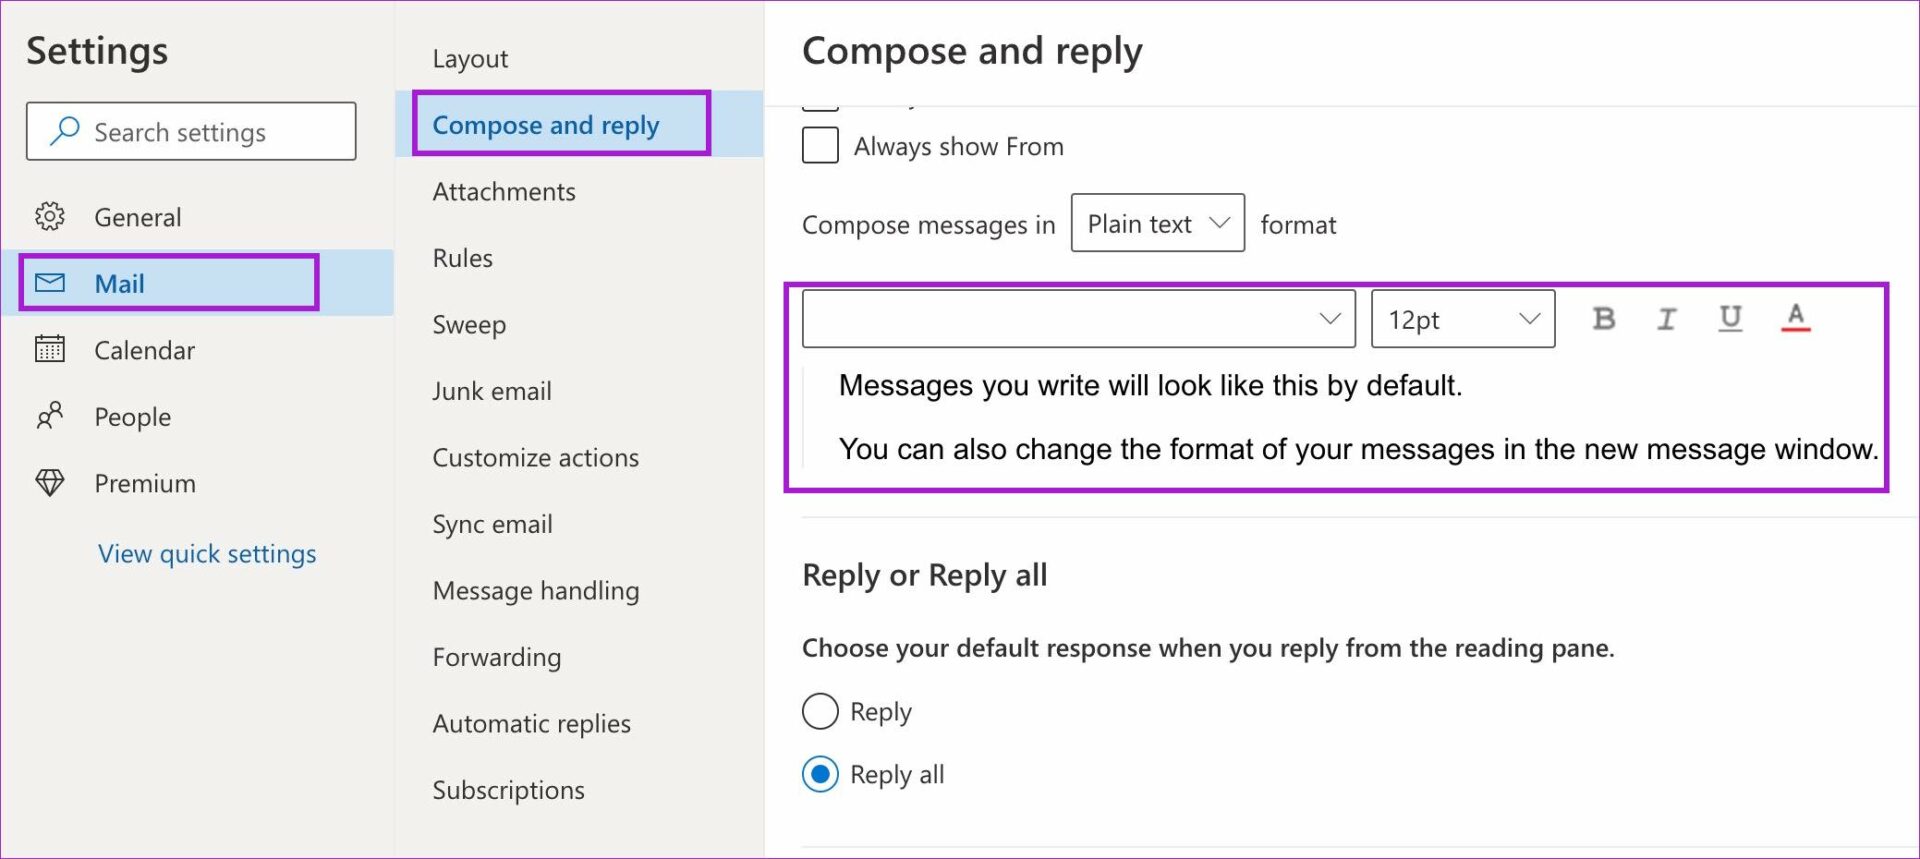 How To Change Font Style In Outlook Desktop And Mobile - Guiding Tech